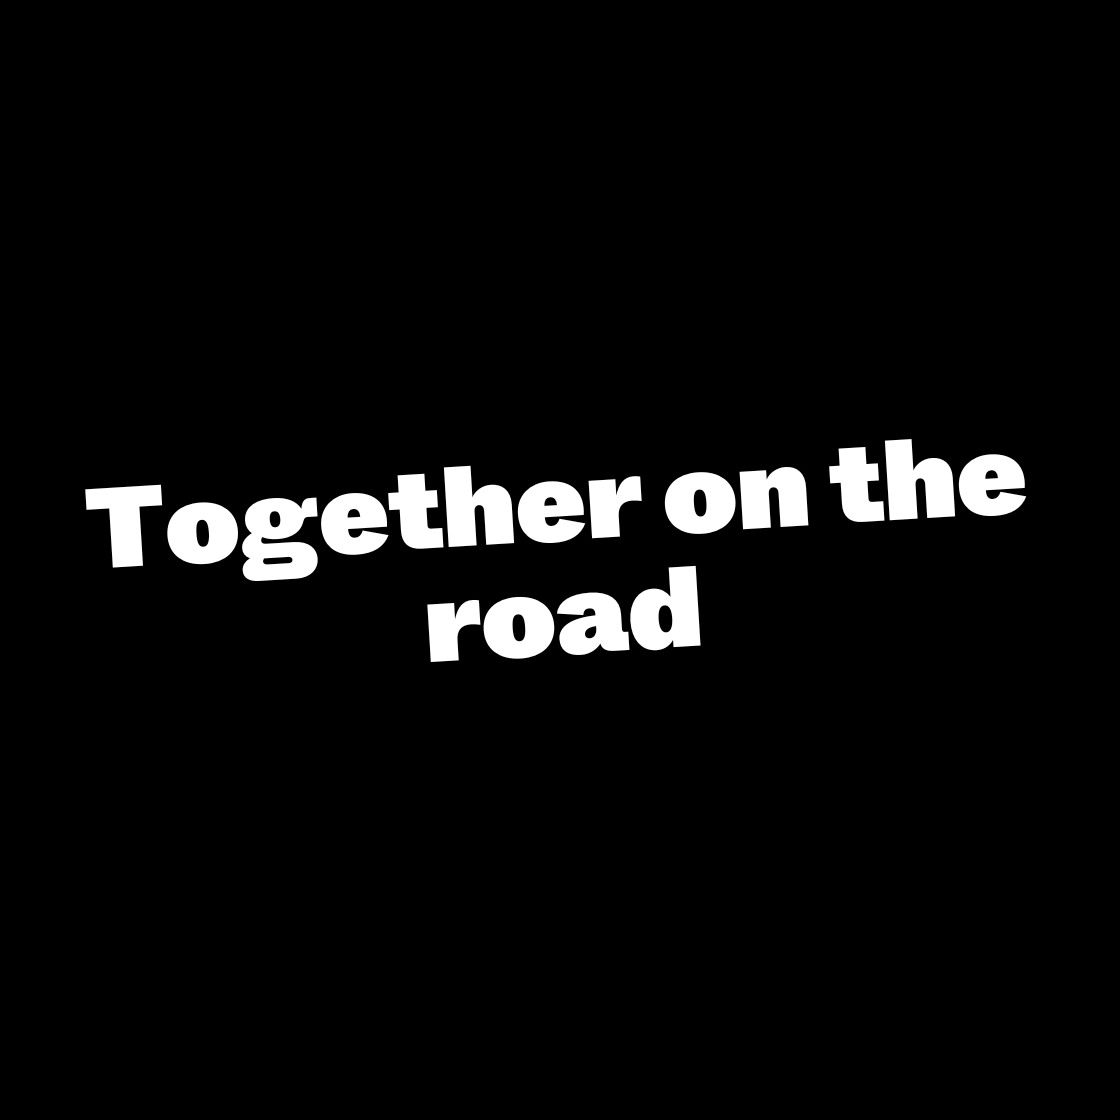 Together on the road